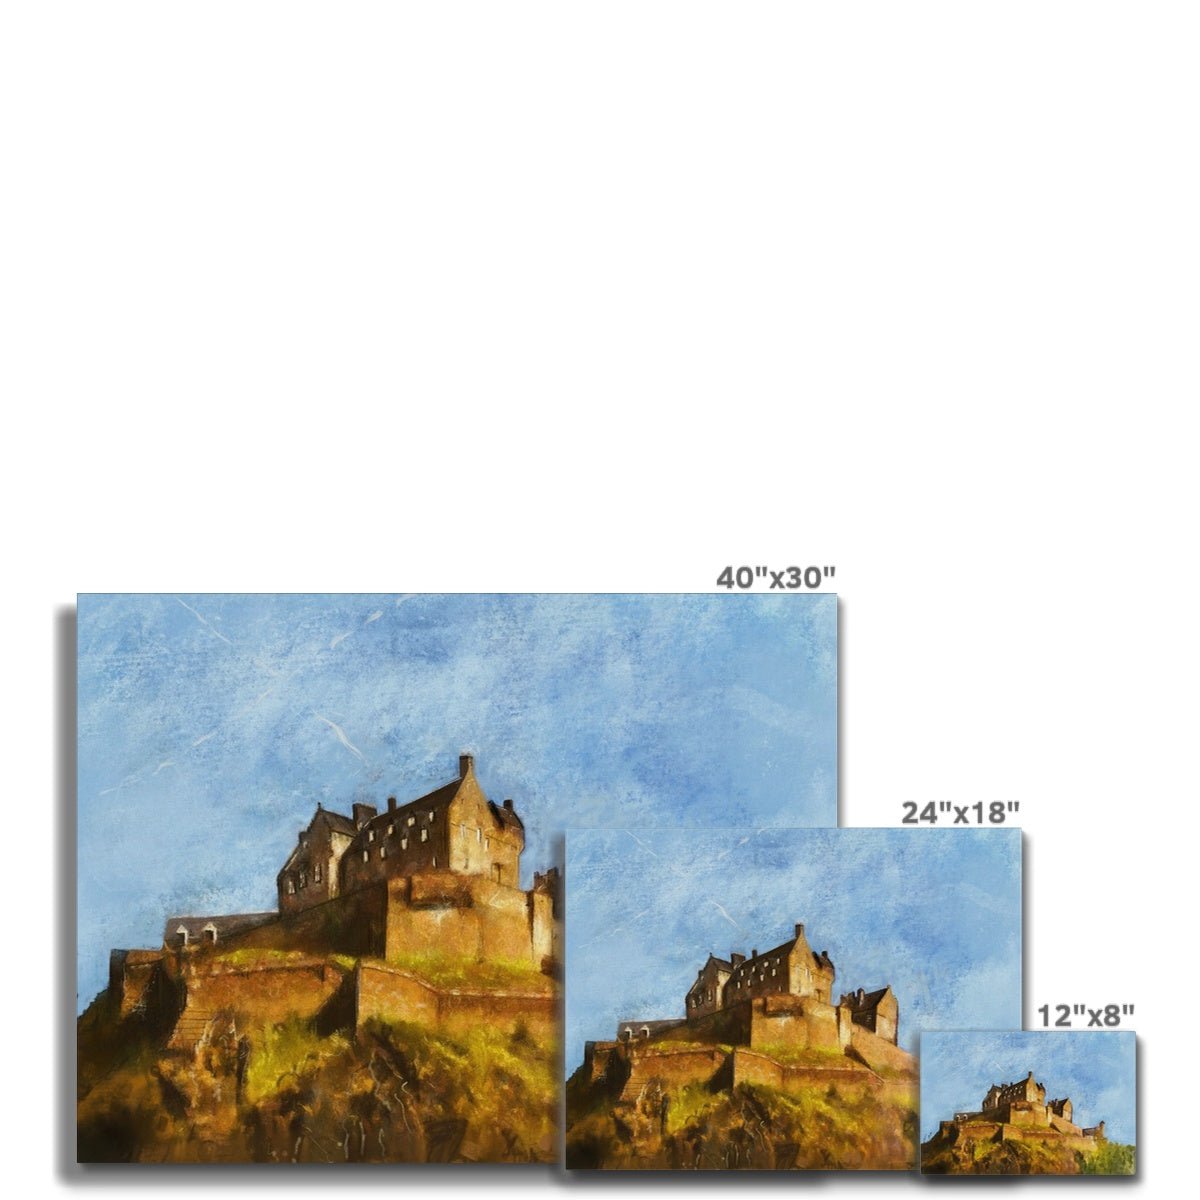 Edinburgh Castle Painting | Canvas From Scotland-Contemporary Stretched Canvas Prints-Historic & Iconic Scotland Art Gallery-Paintings, Prints, Homeware, Art Gifts From Scotland By Scottish Artist Kevin Hunter